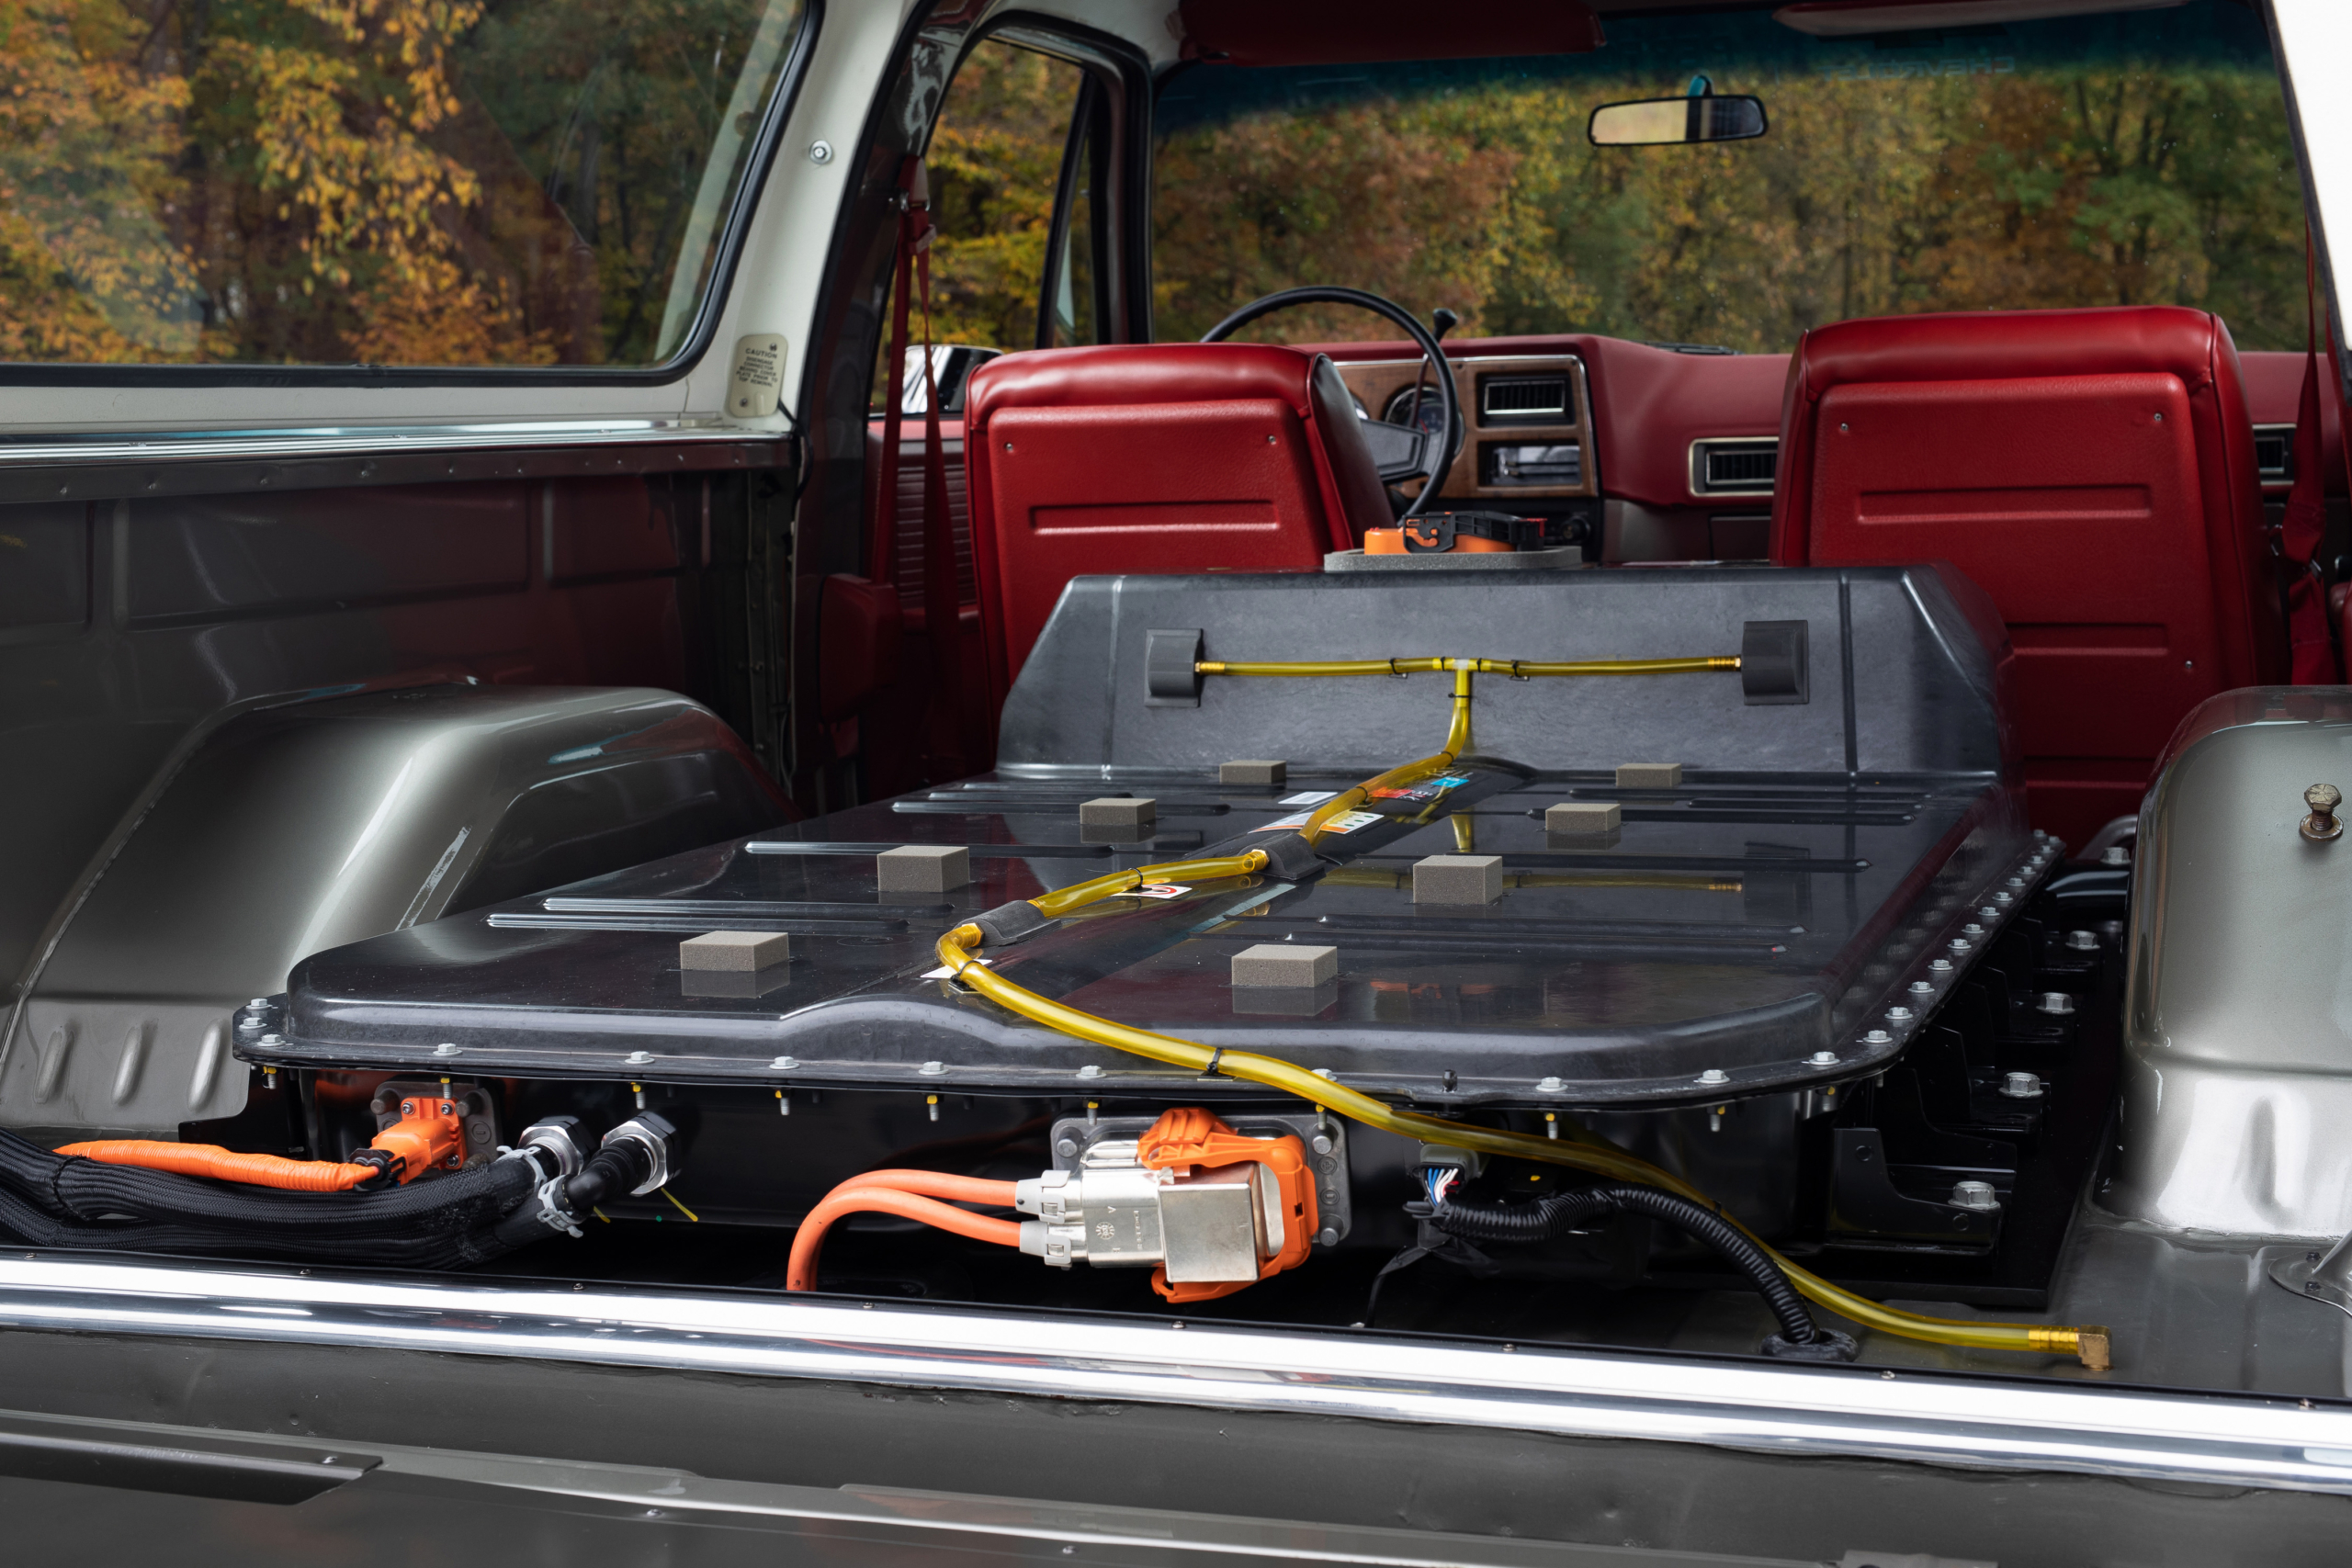 Power for the 1977 K5 Blazer-E is supplied by a 400-volt Bolt EV battery pack with 60 kilowatt-hours of usable energy installed in the cargo area. Using production controllers and wiring harnesses preserves many Bolt EV features, including shock protection, battery heating and cooling, battery-overcharge protection and even regenerative braking.